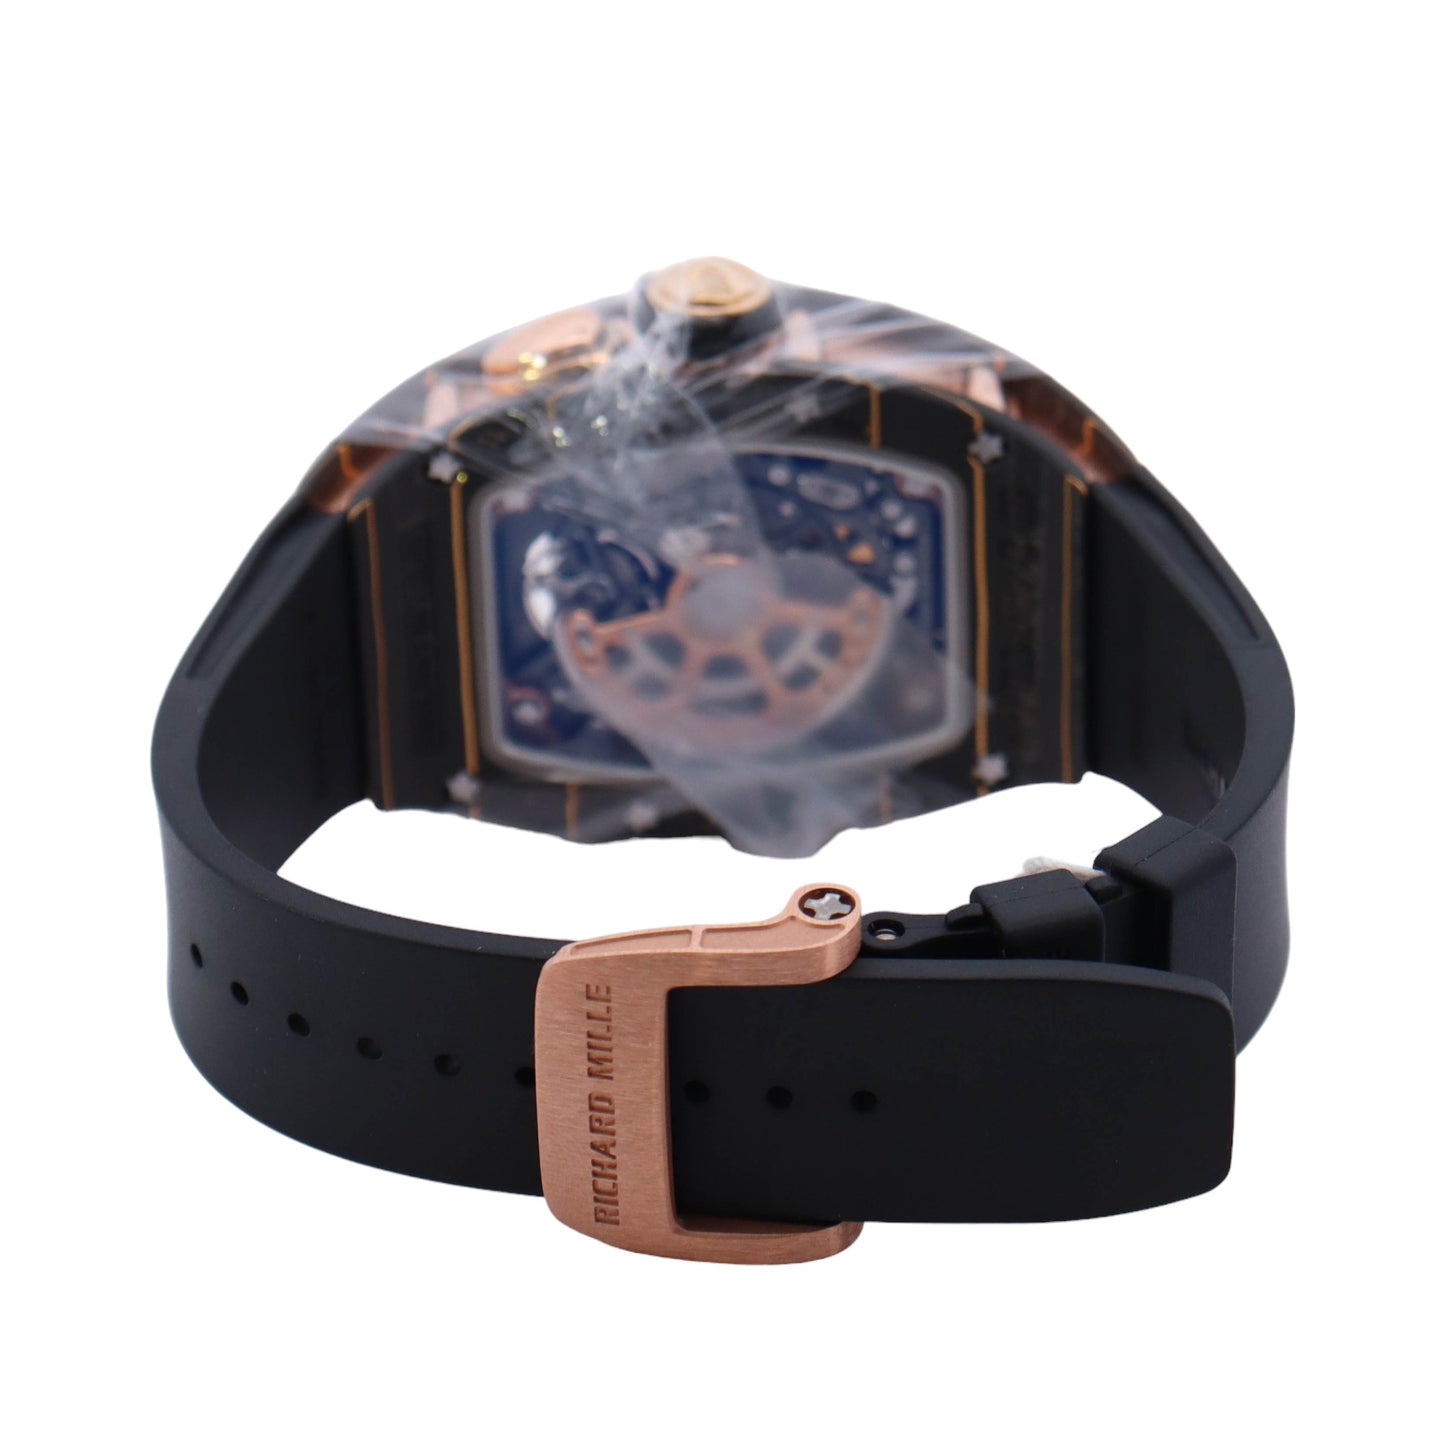 Richard Mille RM037 37mm Carbon TPT & Rose Gold Skeleton Dial Watch Ref# RM037 - Happy Jewelers Fine Jewelry Lifetime Warranty